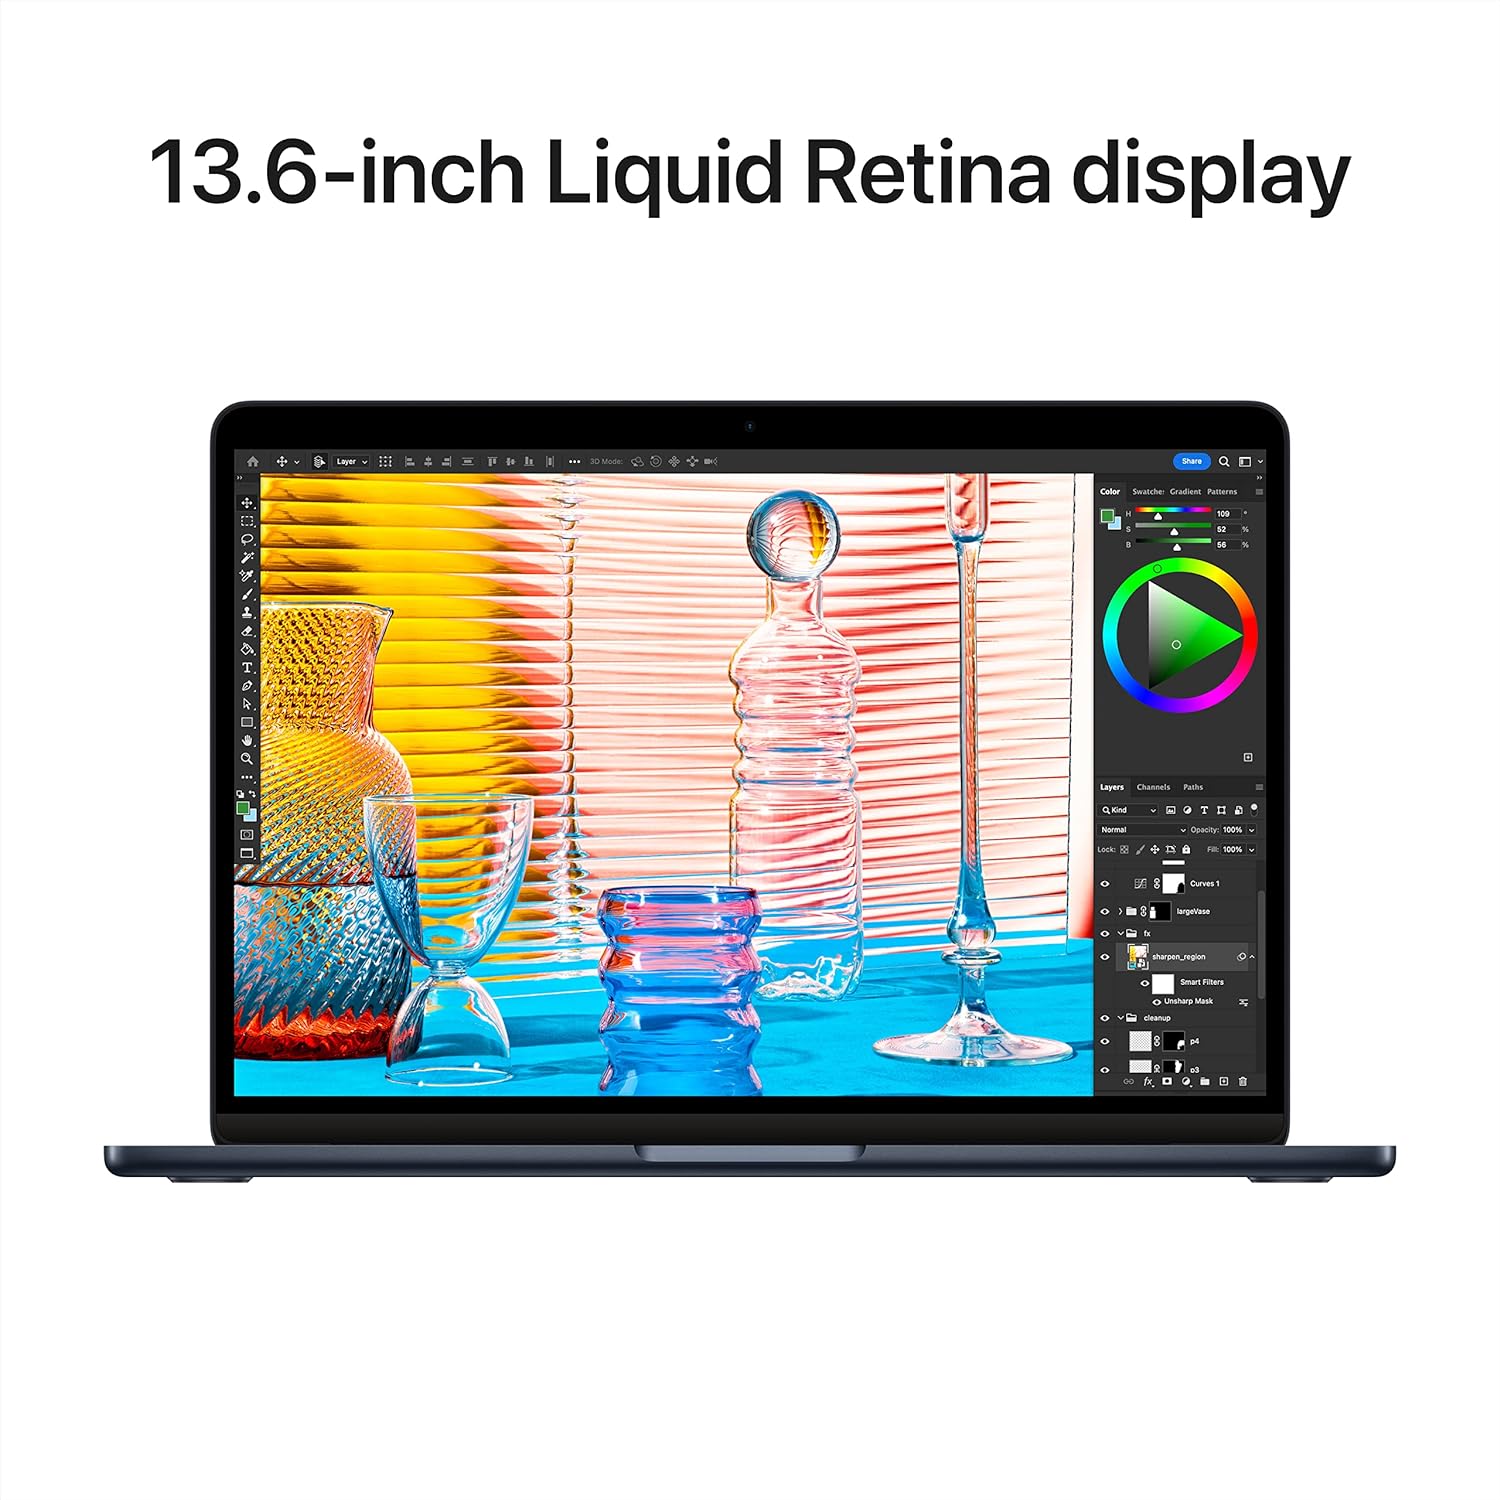 Apple 2022 MacBook Air Laptop with M2 chip: 13.6-inch Liquid Retina Display, 8GB RAM, 256GB SSD Storage, Backlit Keyboard, 1080p FaceTime HD Camera. Works with iPhone and iPad; Starlight